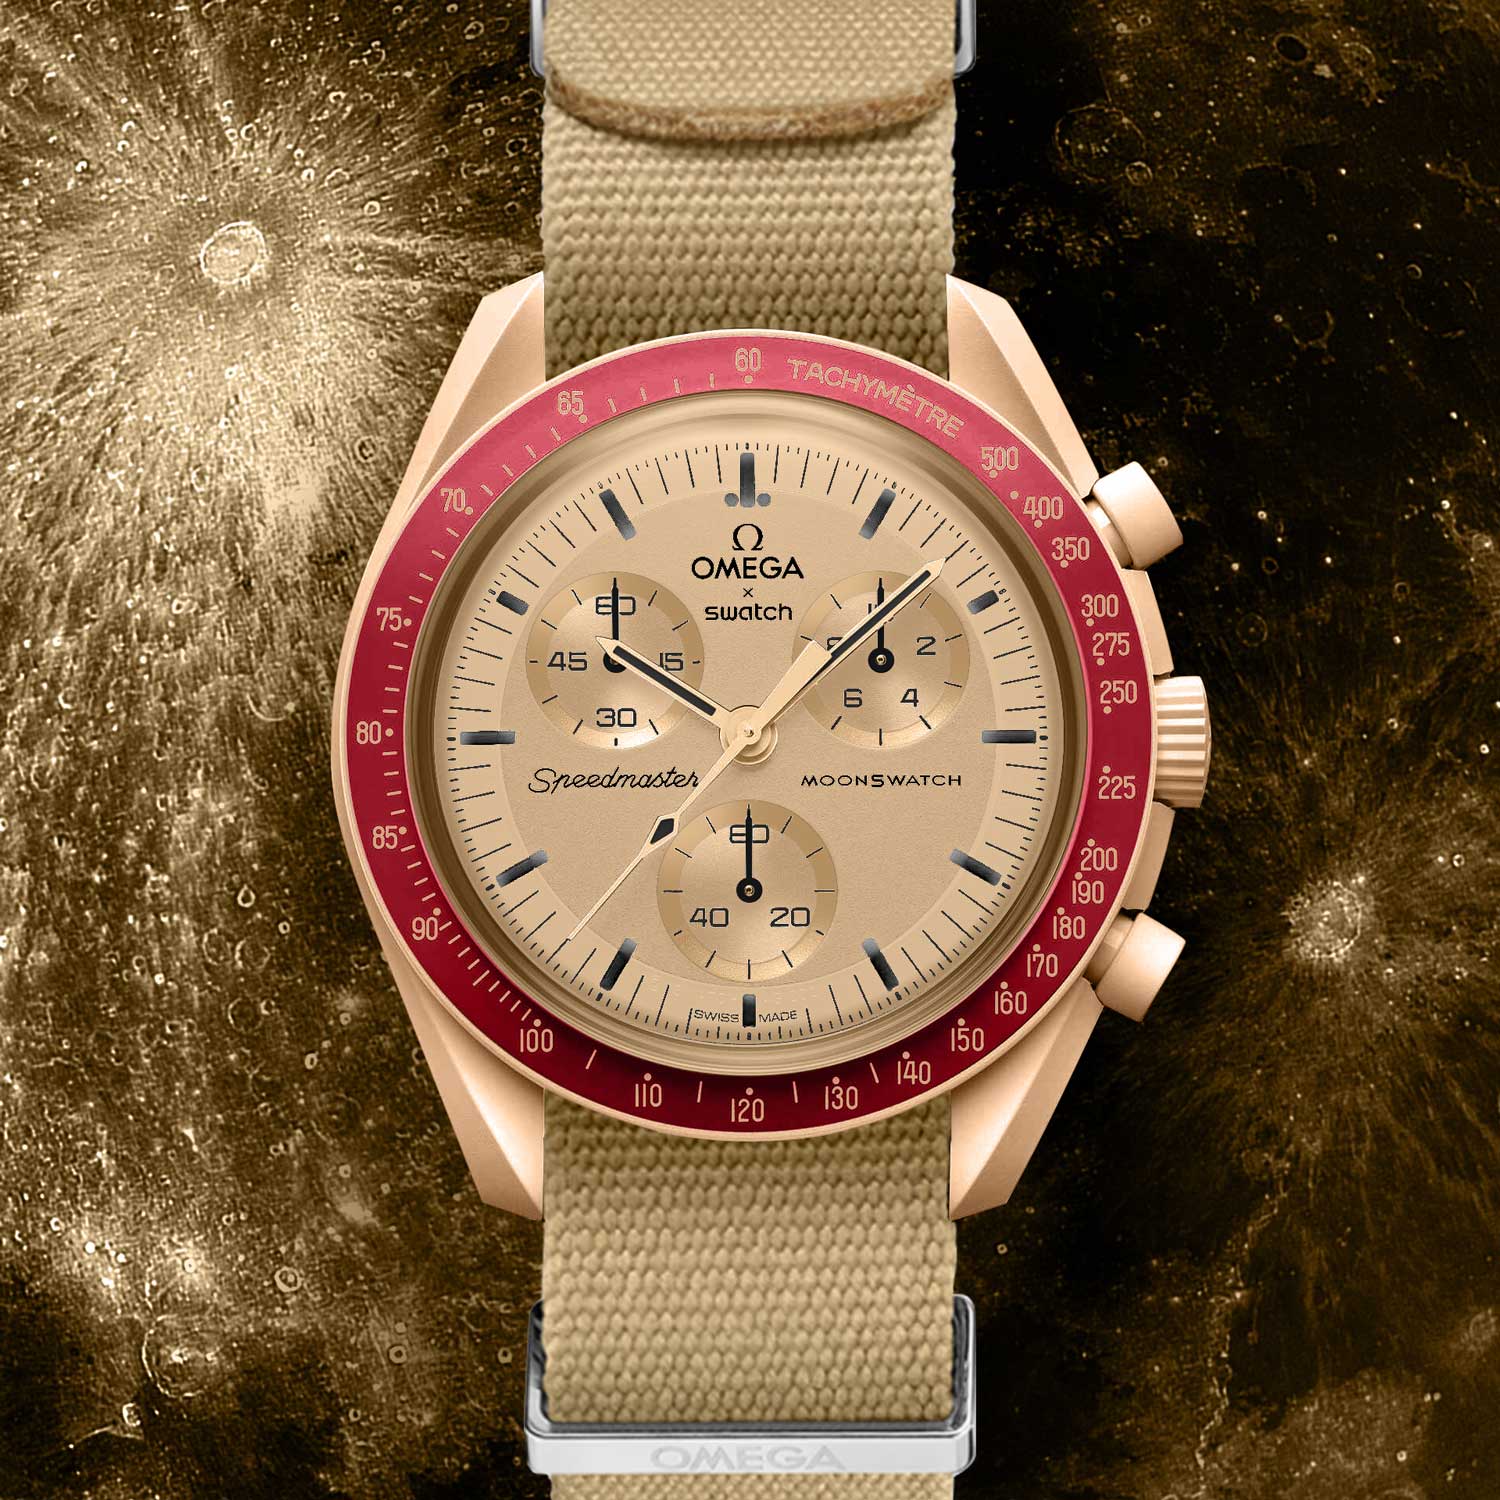 Moonswatch 'Mission to Moonshine Gold' Apollo 11 Anniversary Edition